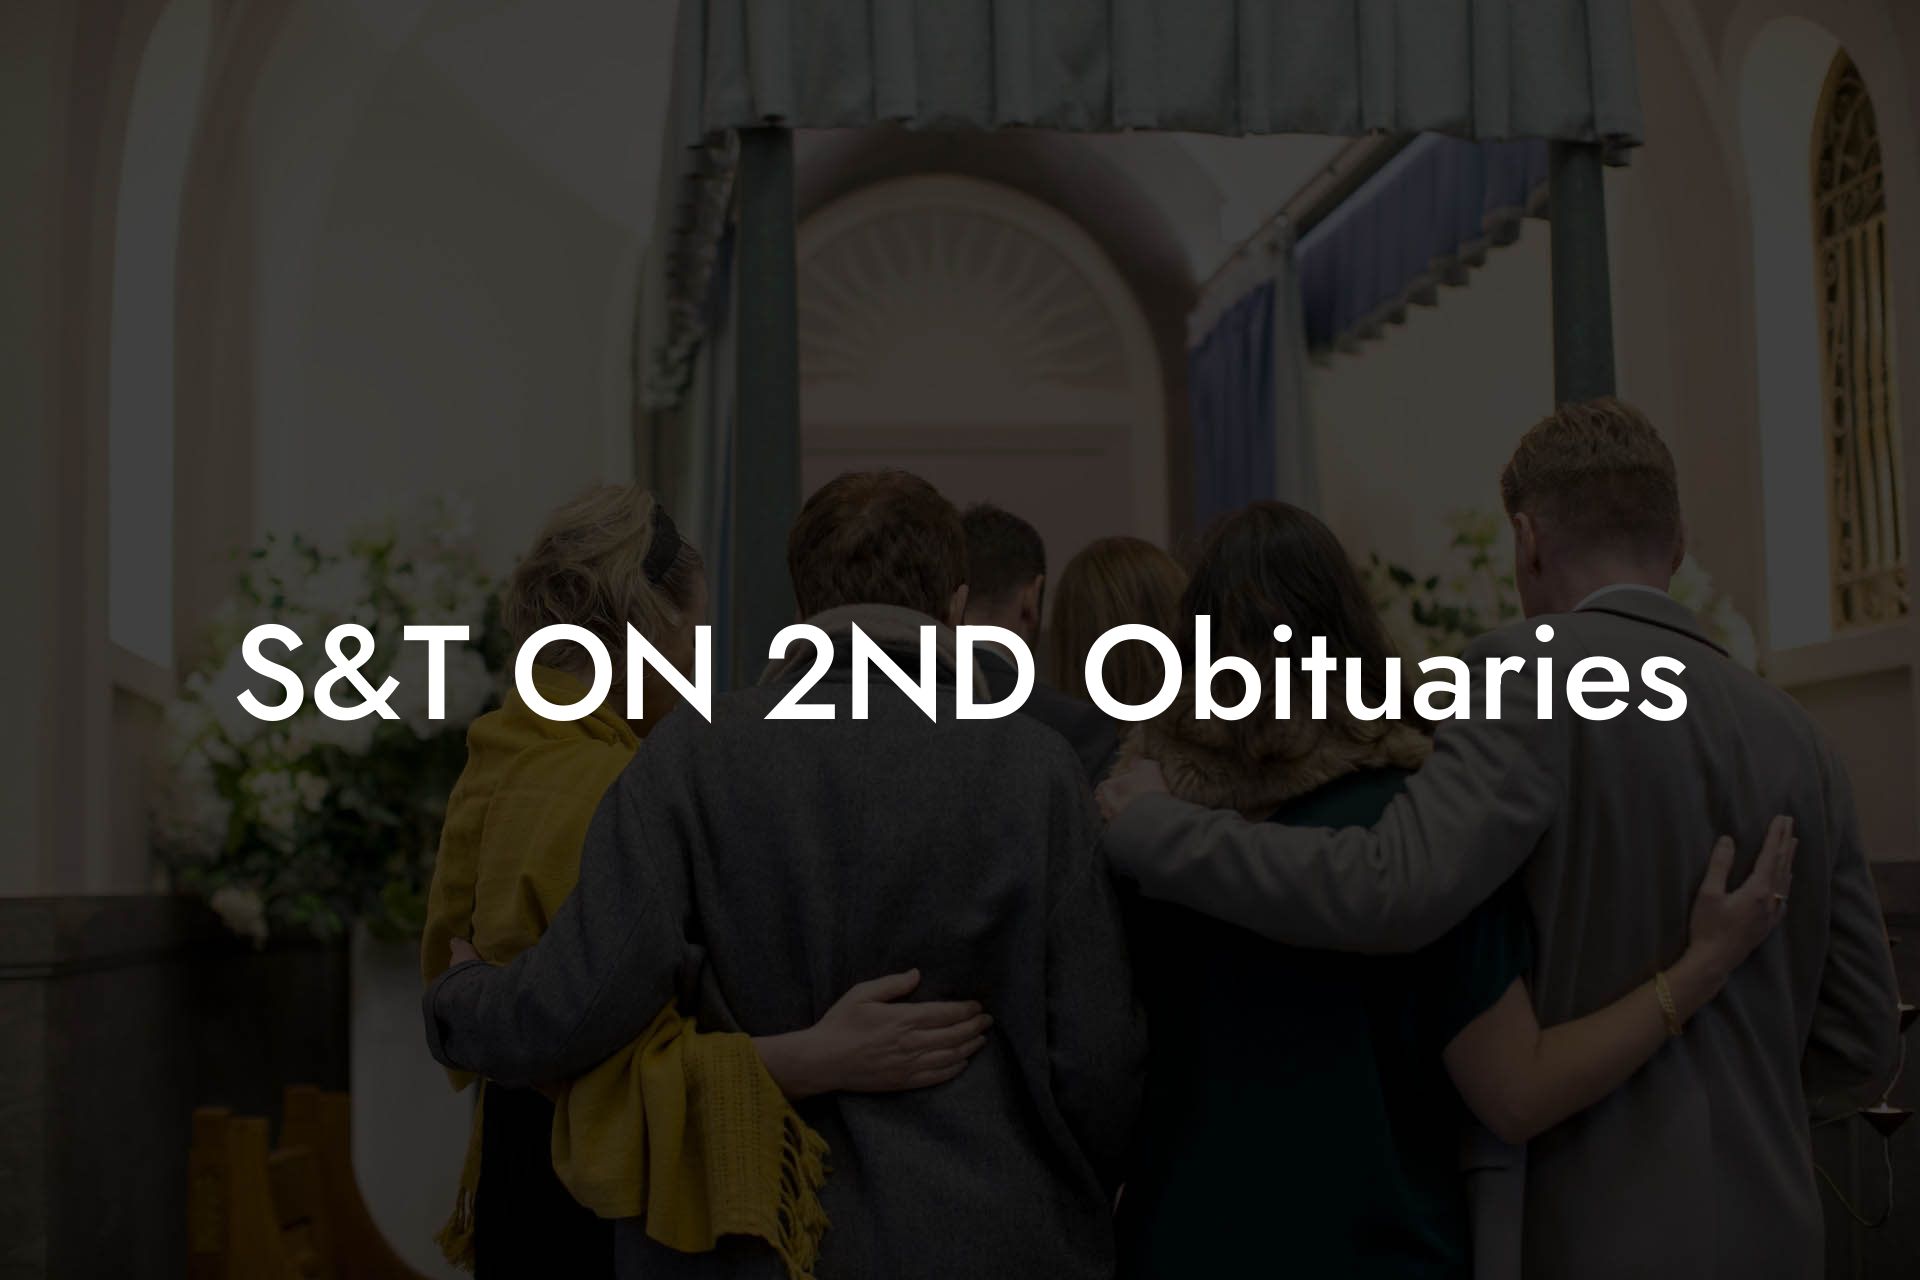 S&T ON 2ND Obituaries